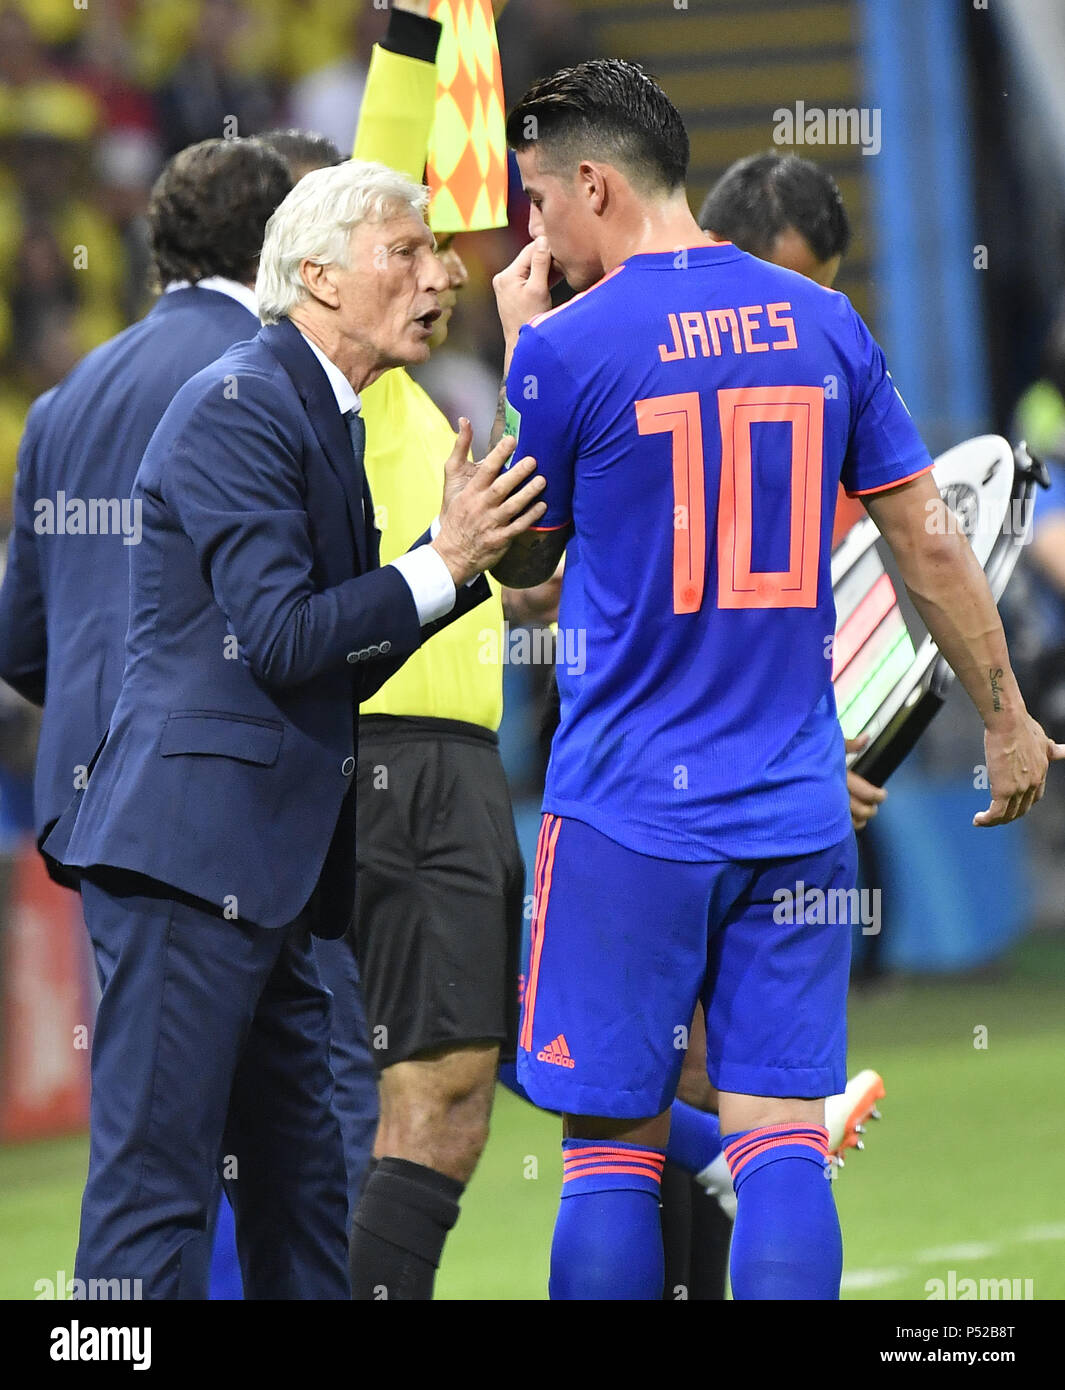 Kazan, Russia. 24th June, 2018. Head coach Jose Pekerman (L) of Colombia gives instructions to James Rodriguez during the 2018 FIFA World Cup Group H match between Poland and Colombia in Kazan, Russia, June 24, 2018. Credit: He Canling/Xinhua/Alamy Live News Stock Photo